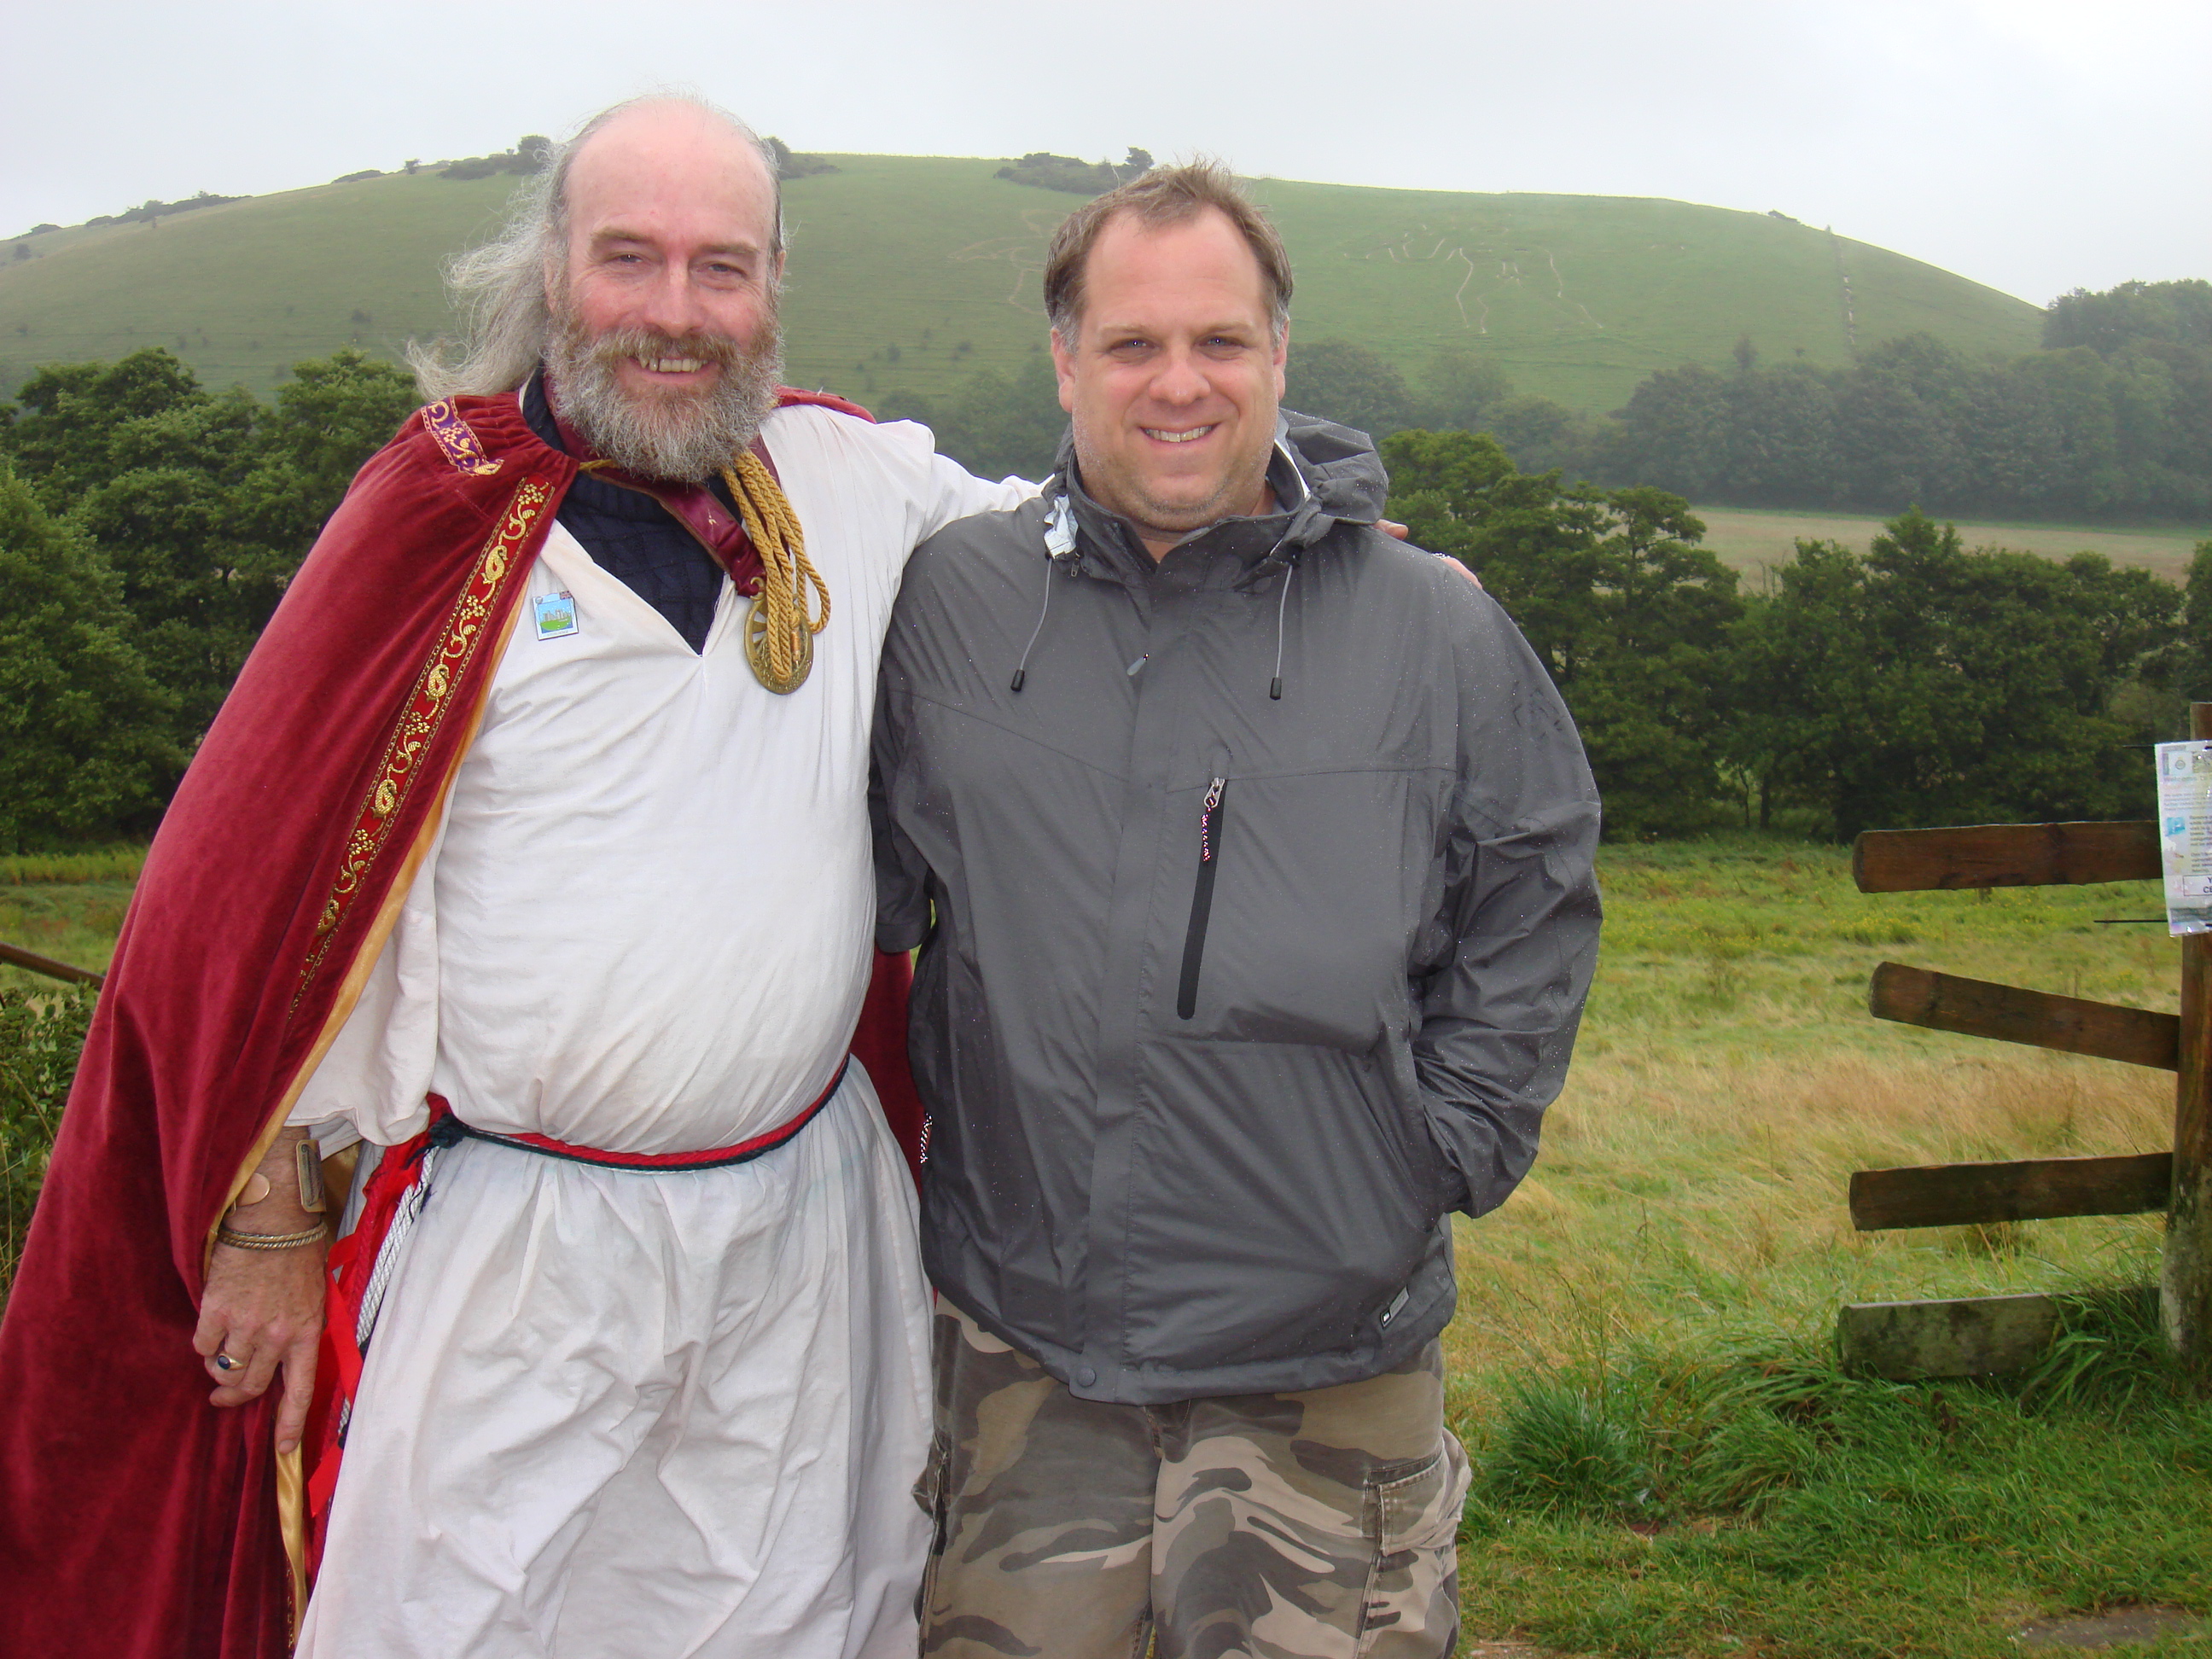 Paul Tarantino with Rollo Maughfling the arch druid of Stonehenge during production of THE NATURE OF EXISTENCE in front of the Cerne Abbas Giant, Dorset, England.